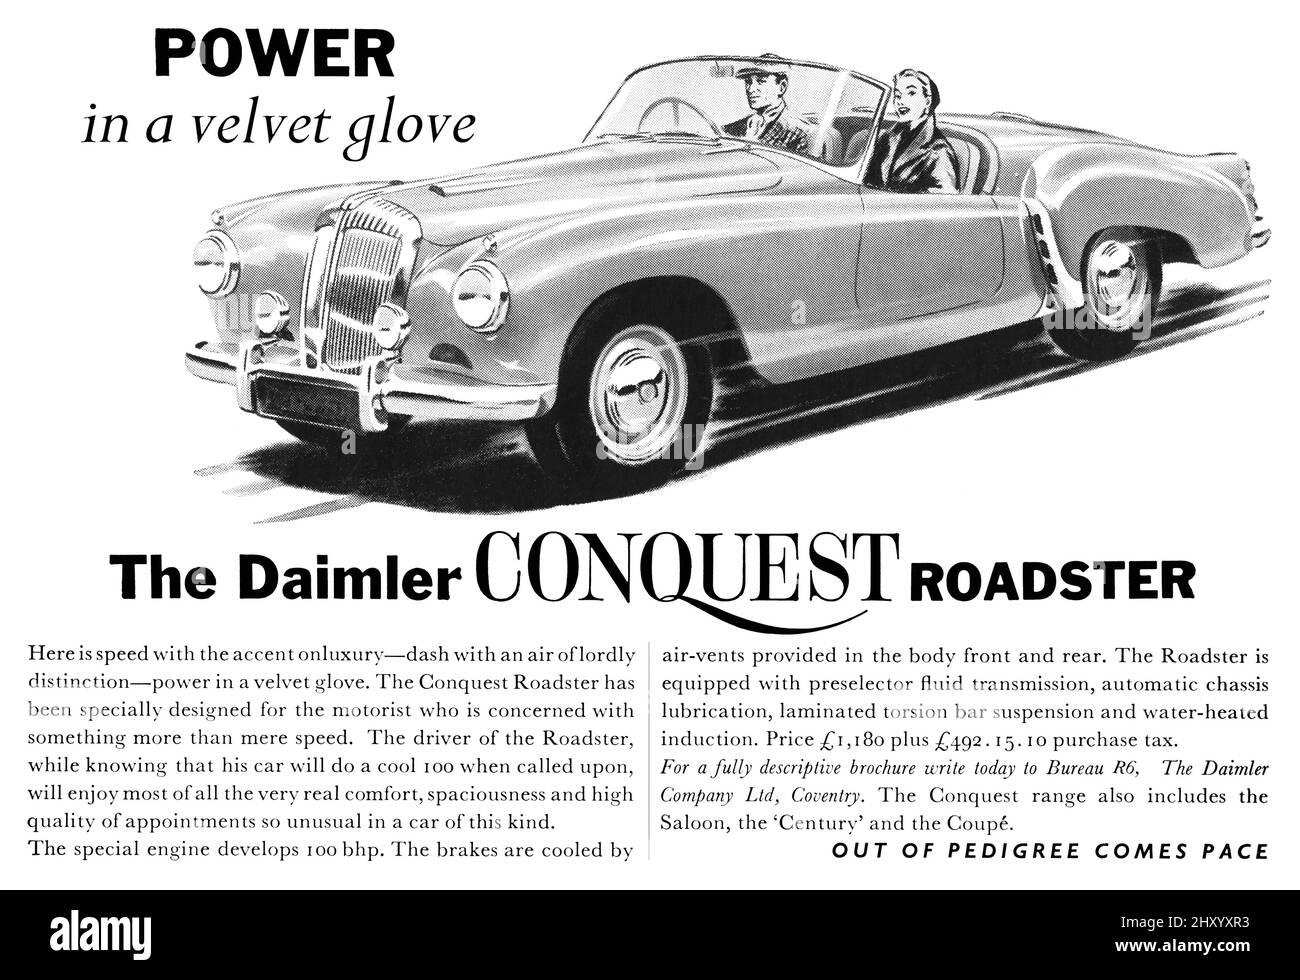 1954 British advertisement for the Daimler Conquest Roadster sports car. Stock Photo